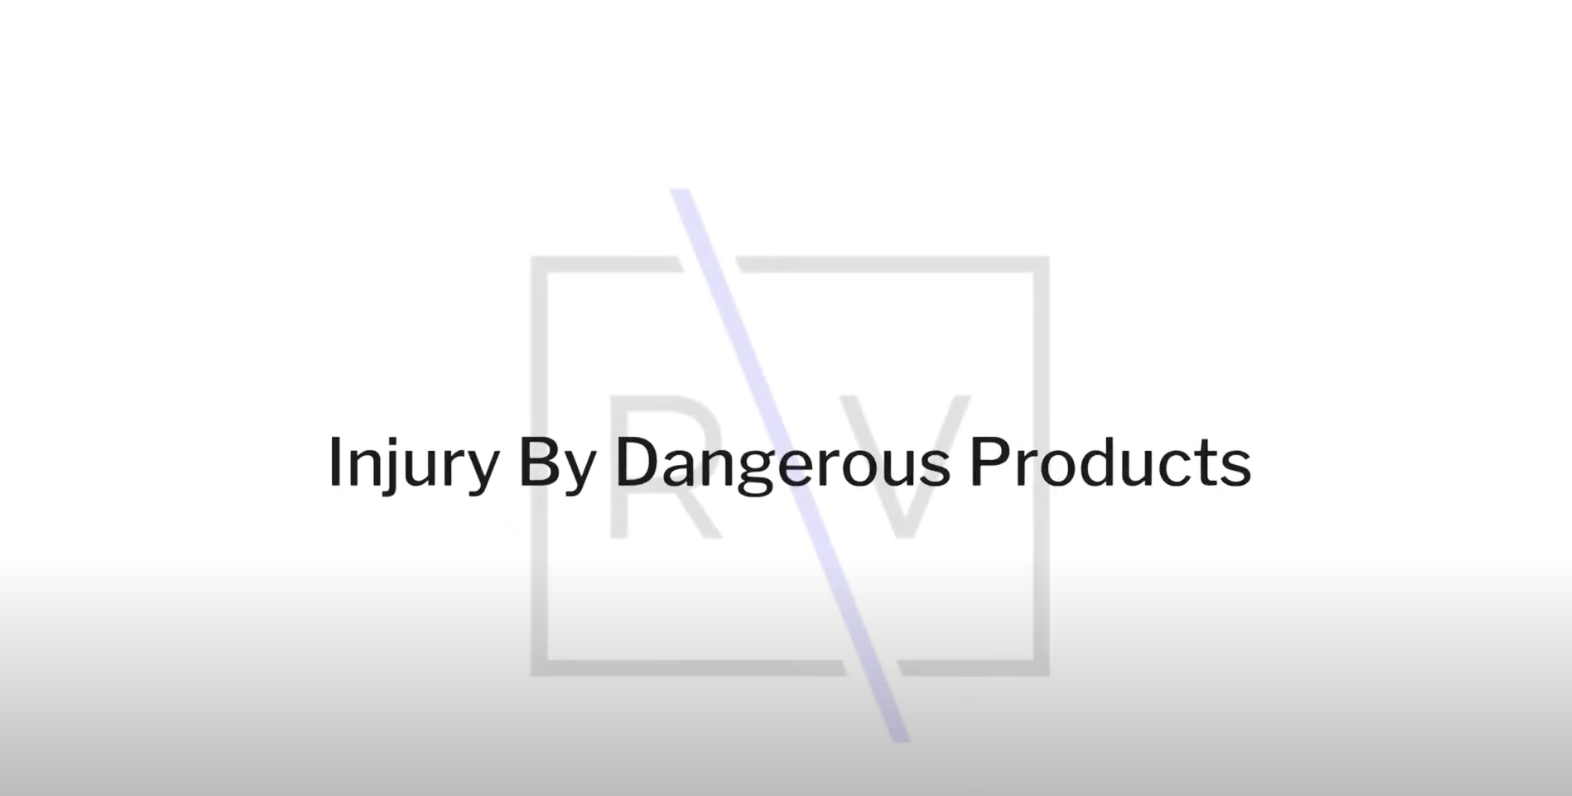 Injury By Dangerous Products